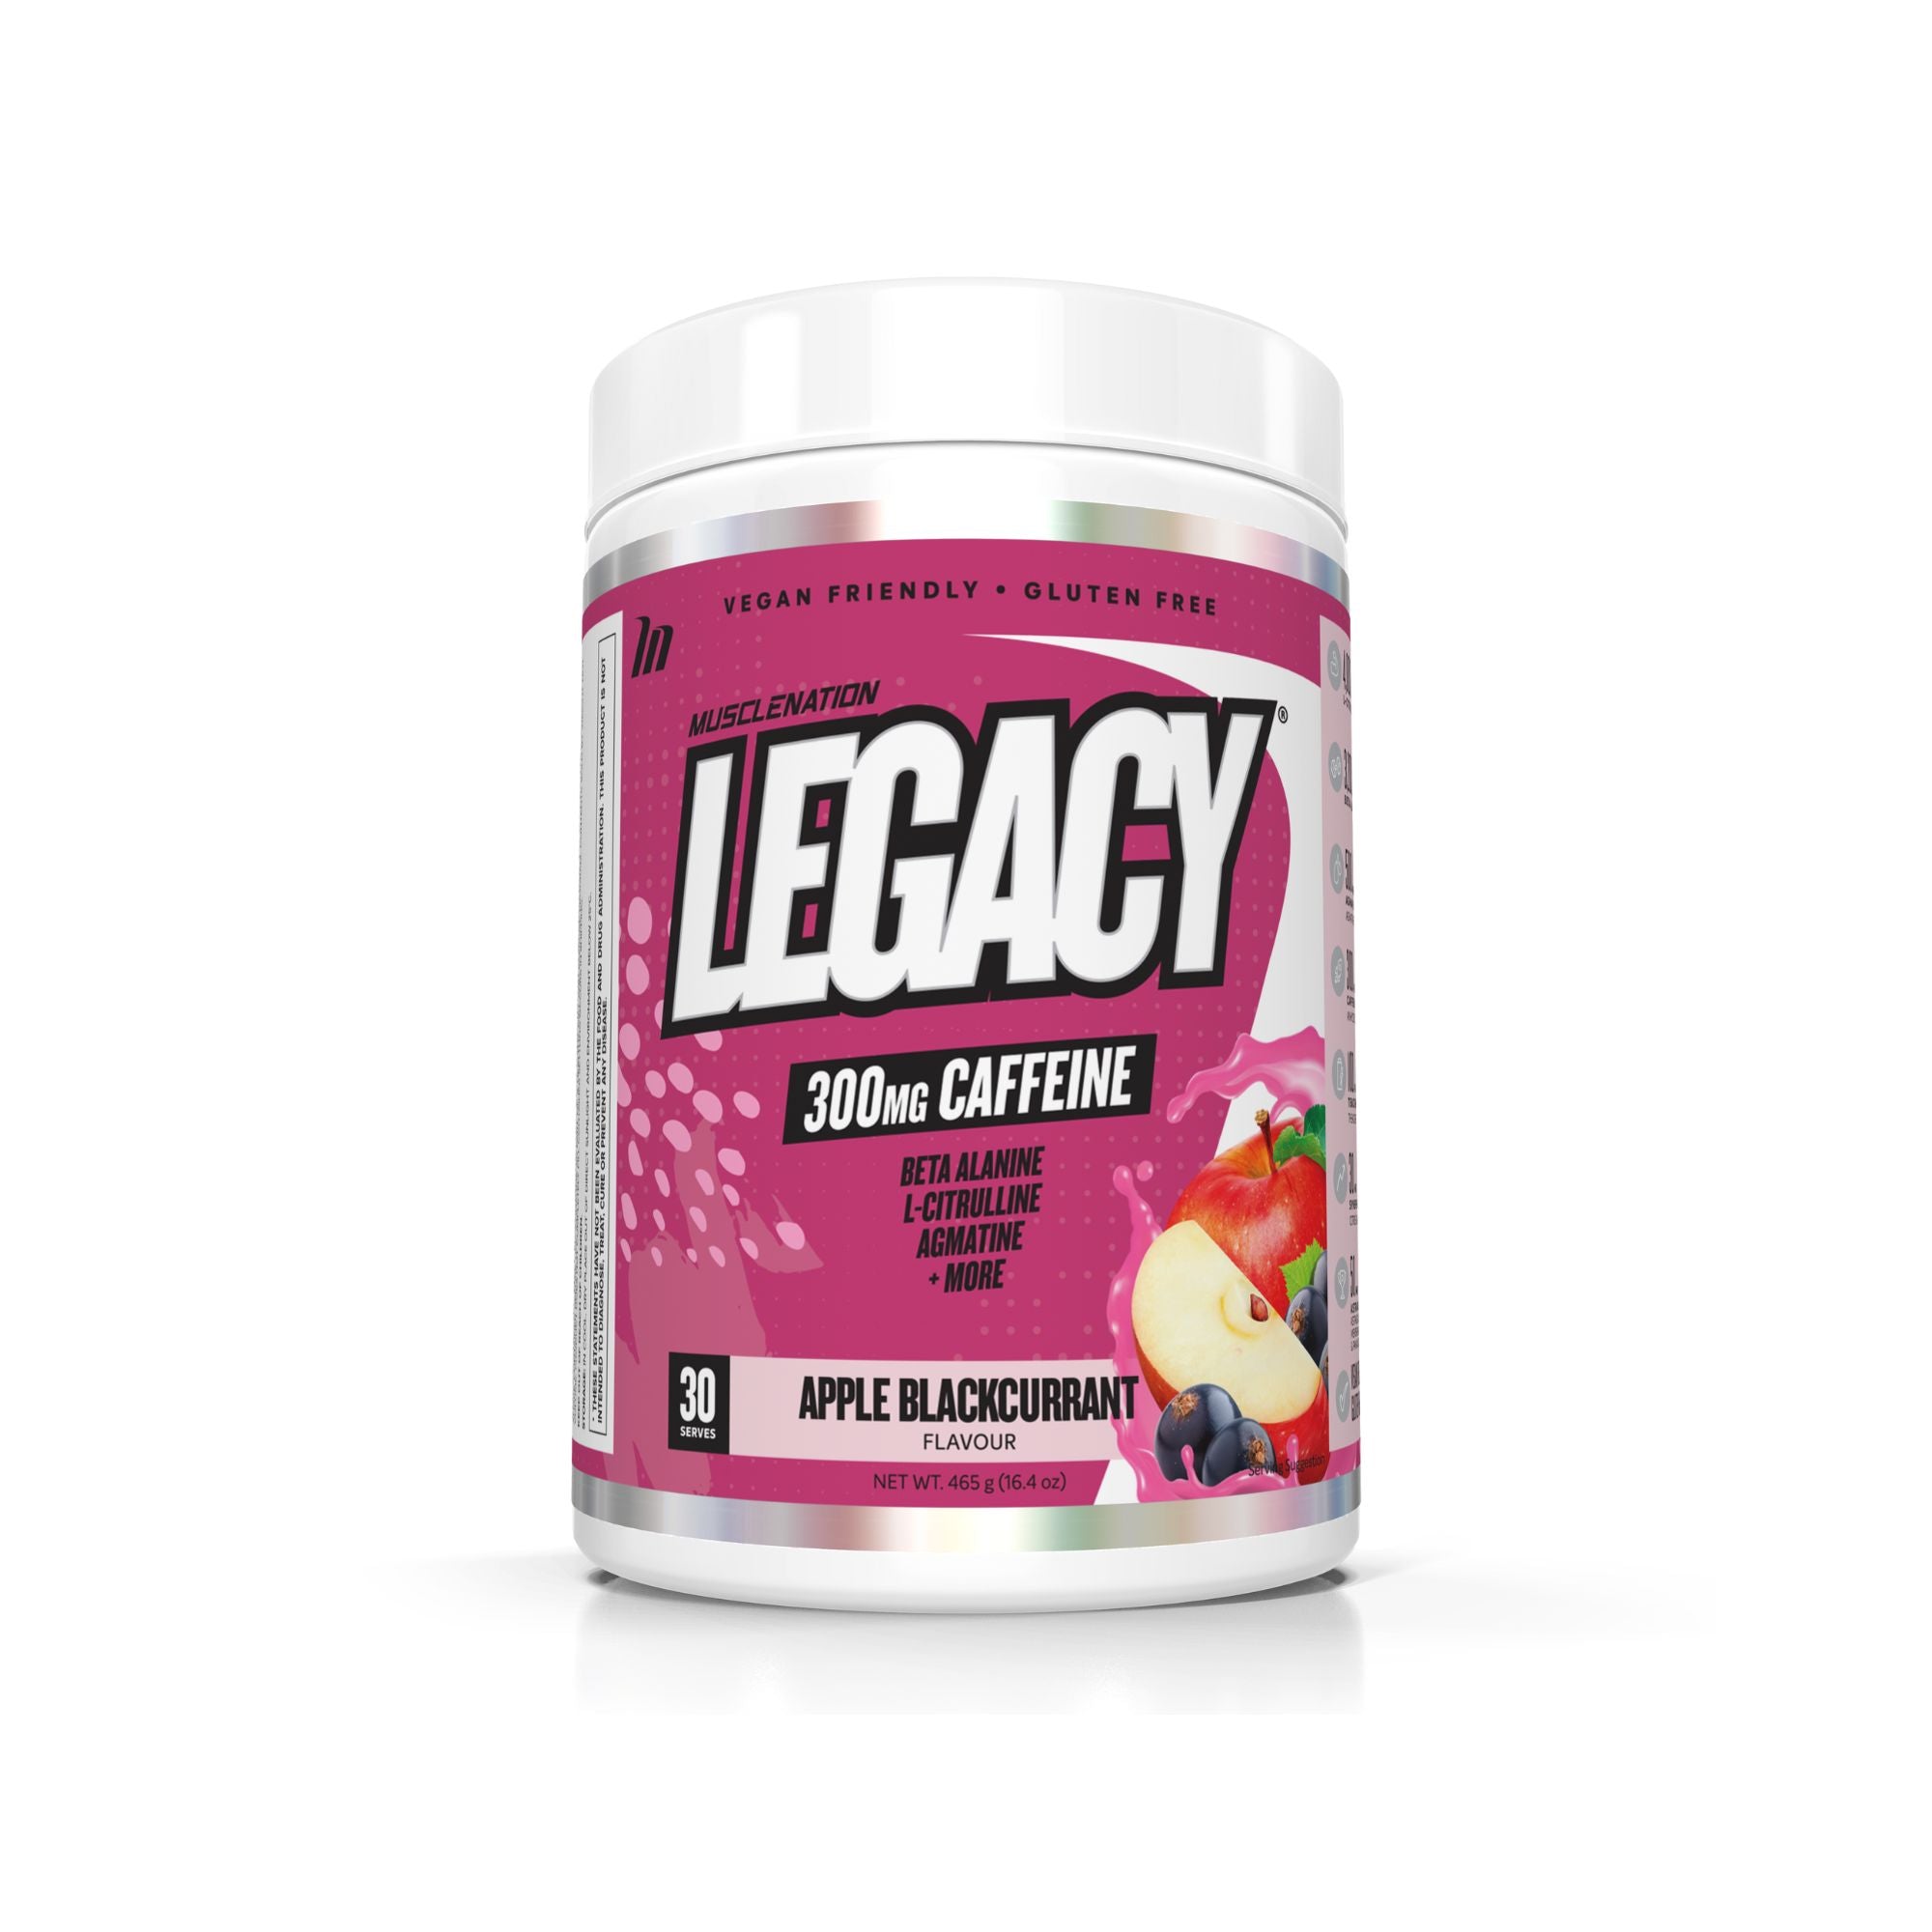 Muscle Nation Legacy Pre Workout